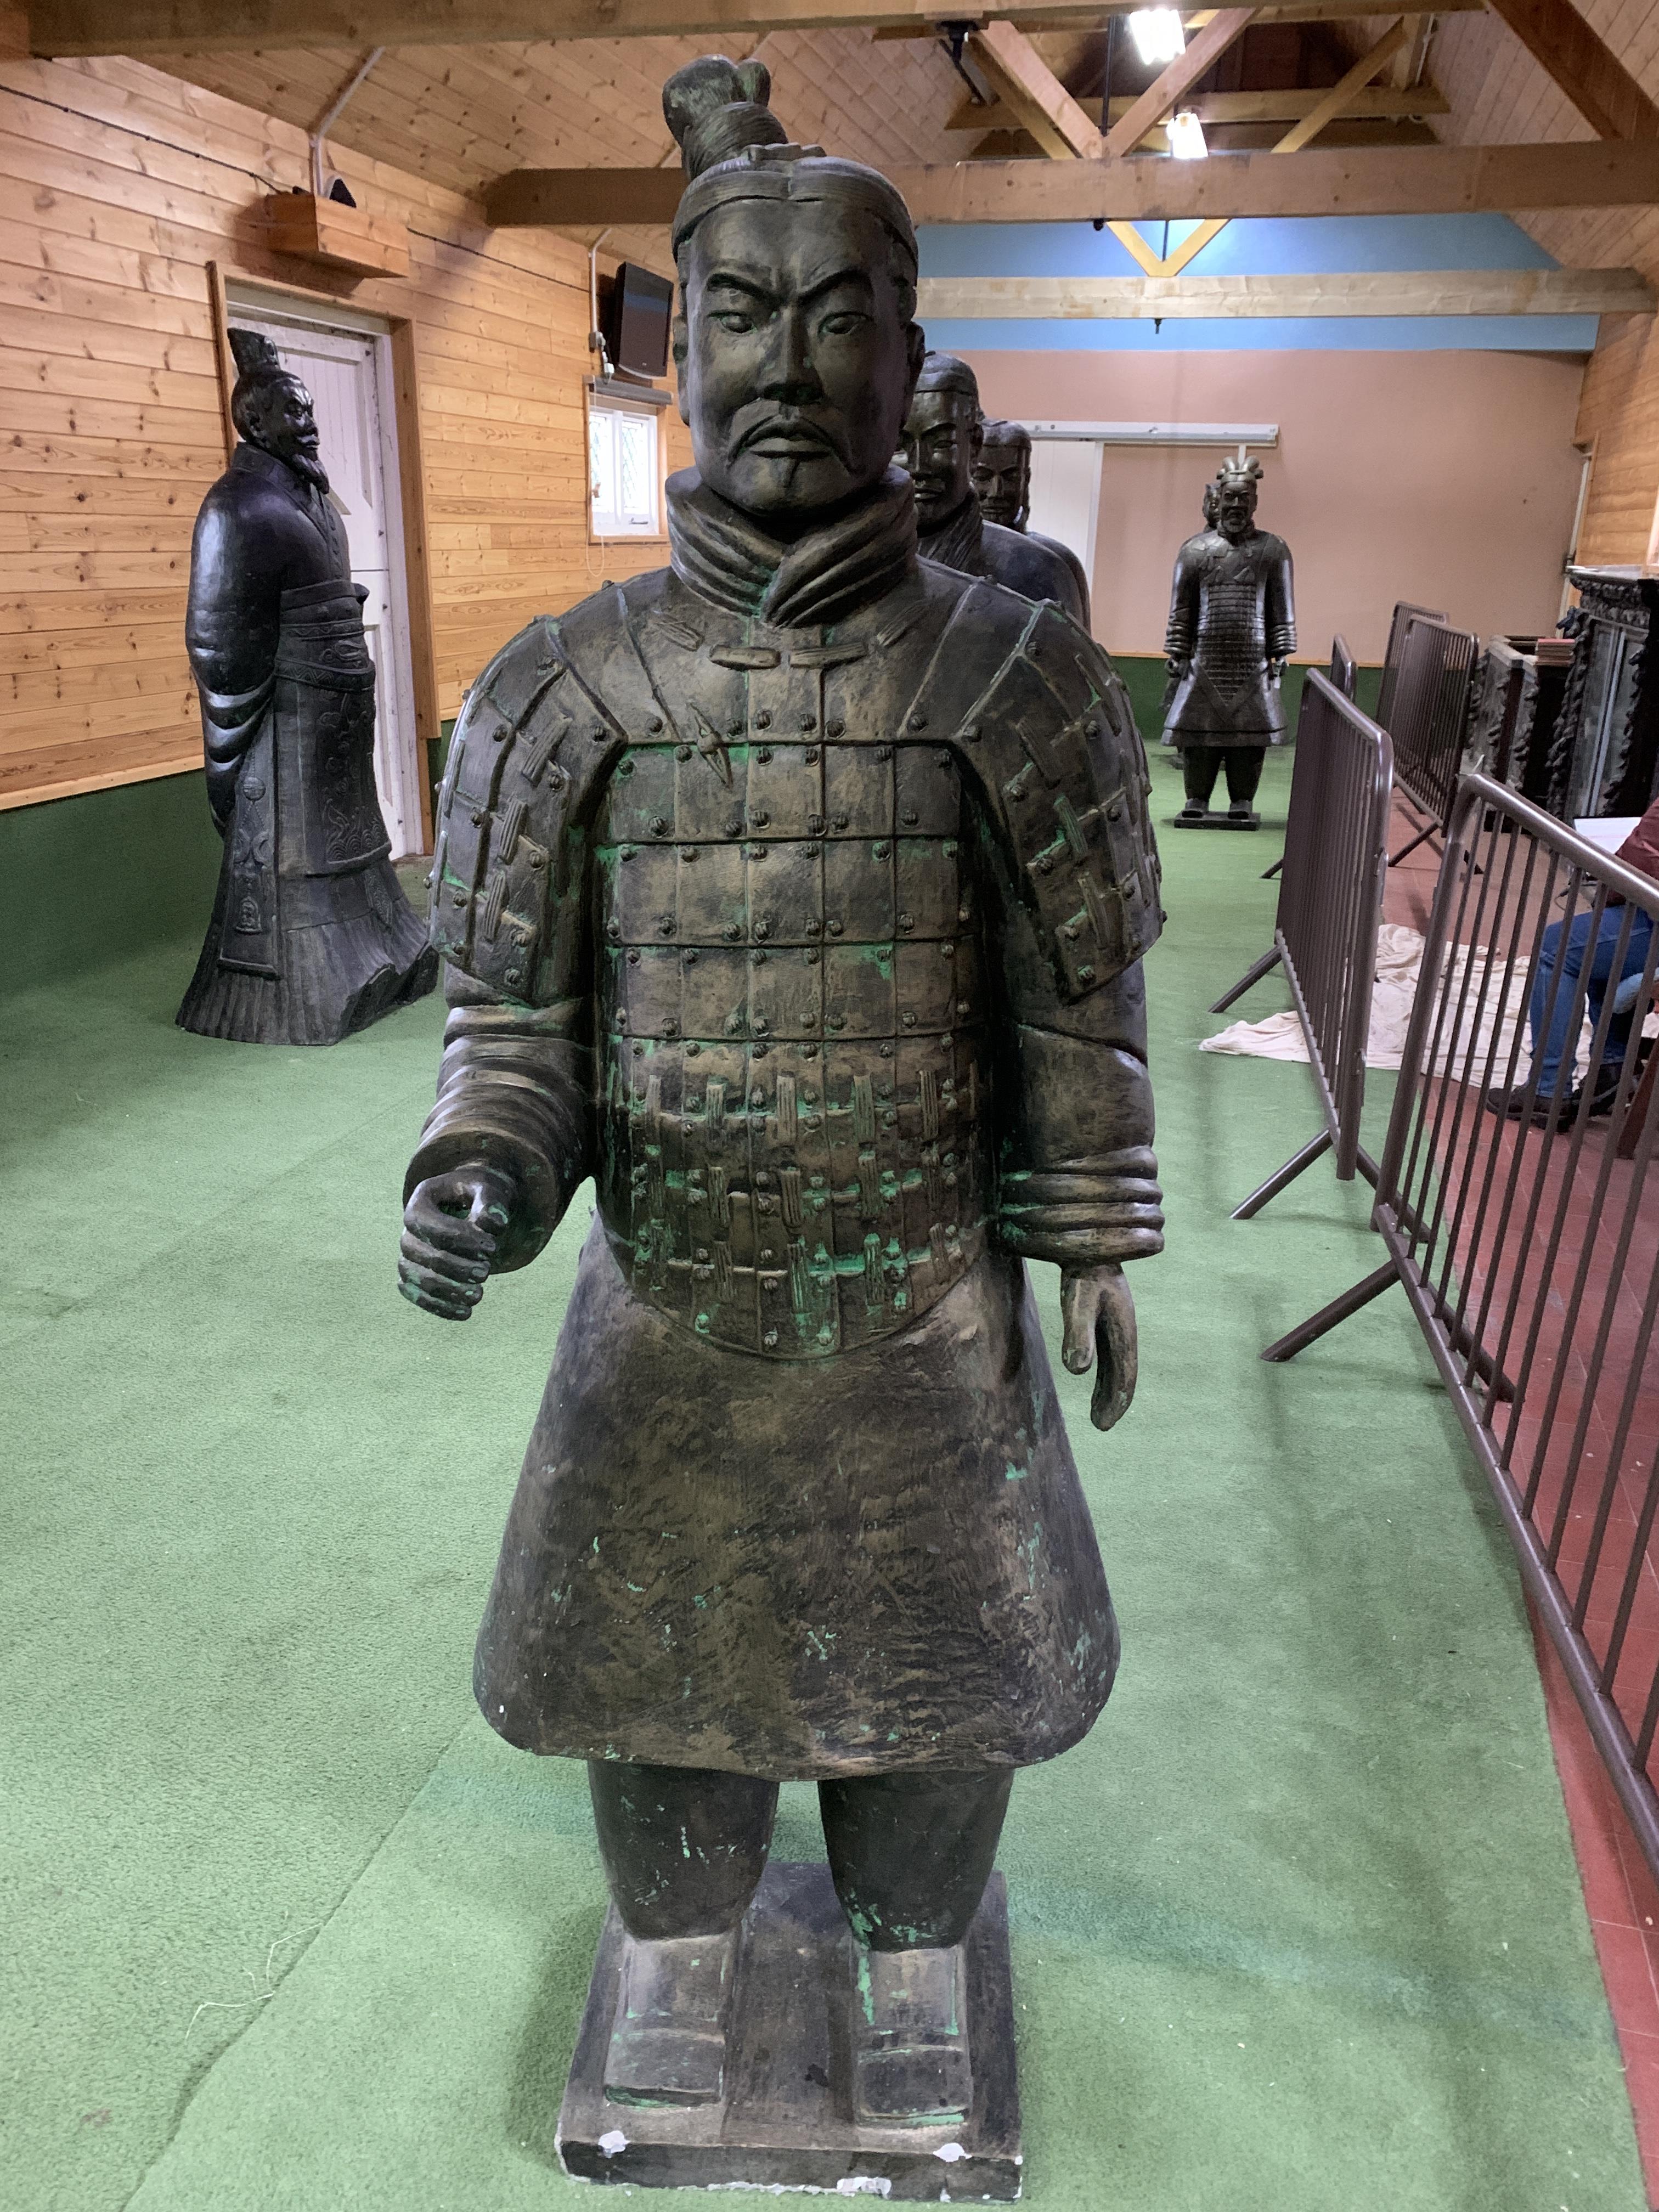 A Qin style terracotta figure of a lightly armed warrior